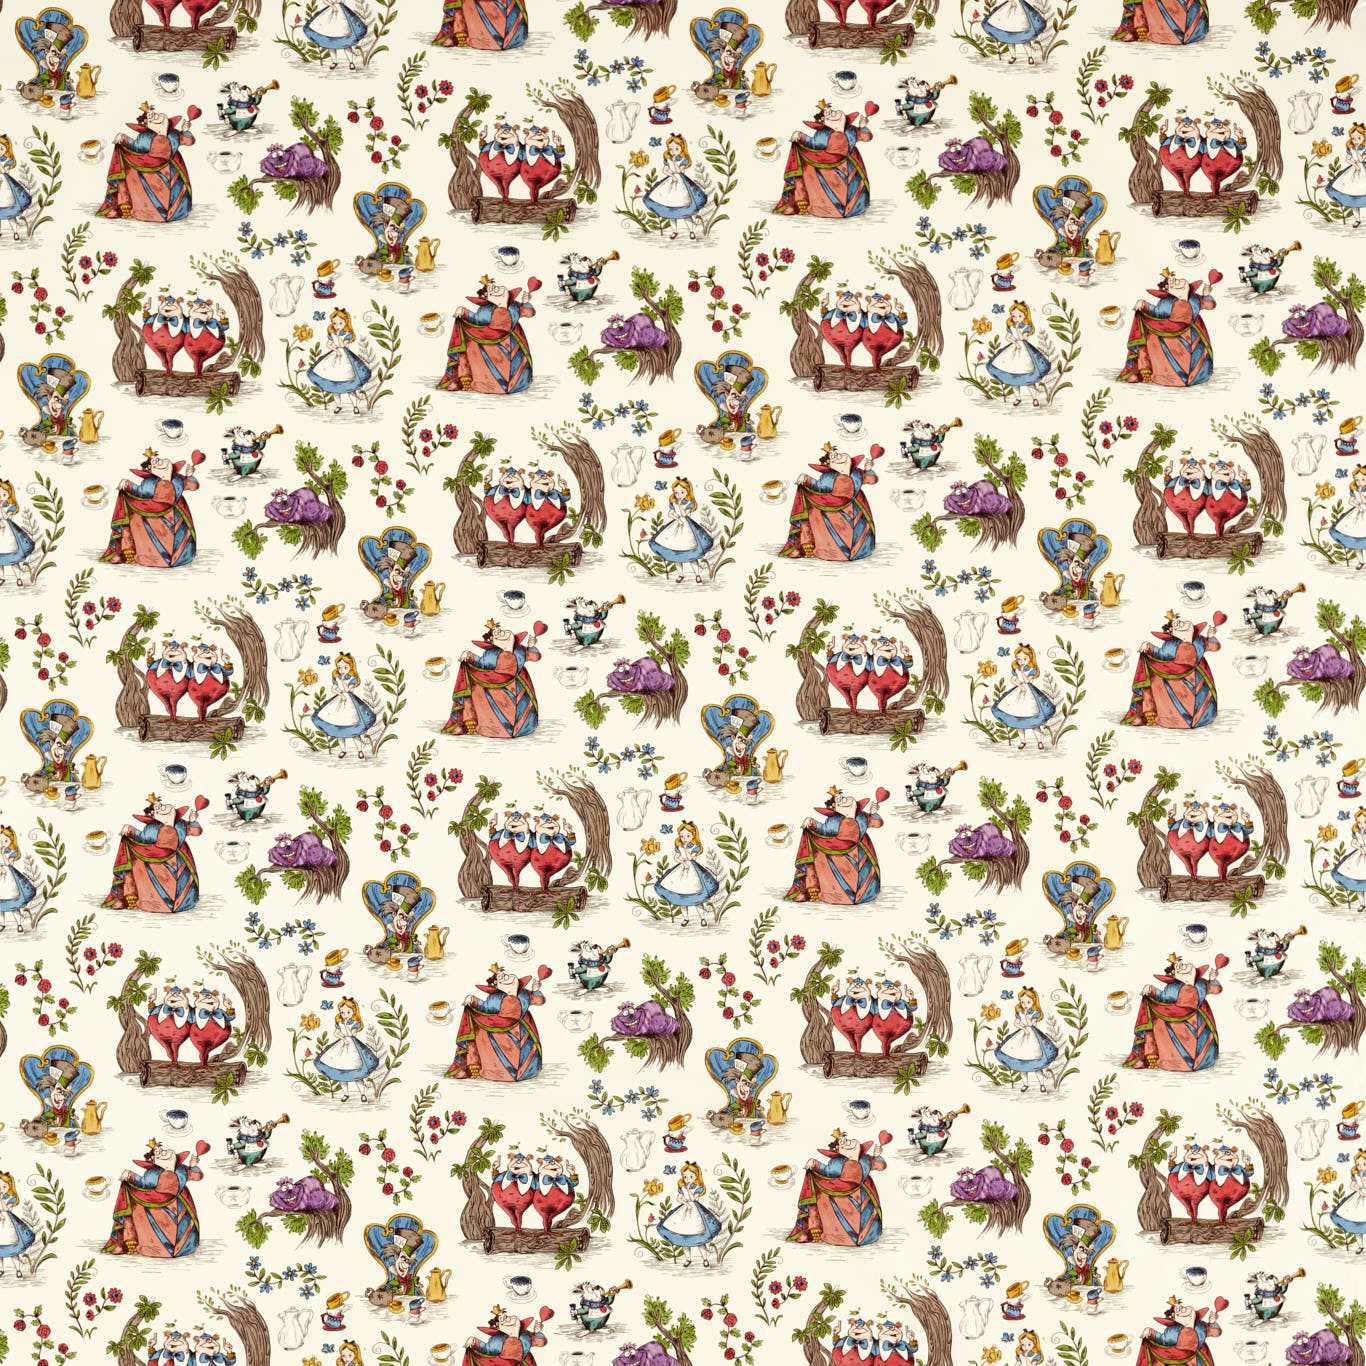 Alice in Wonderland Hundreds and Thousands Fabric By Sanderson